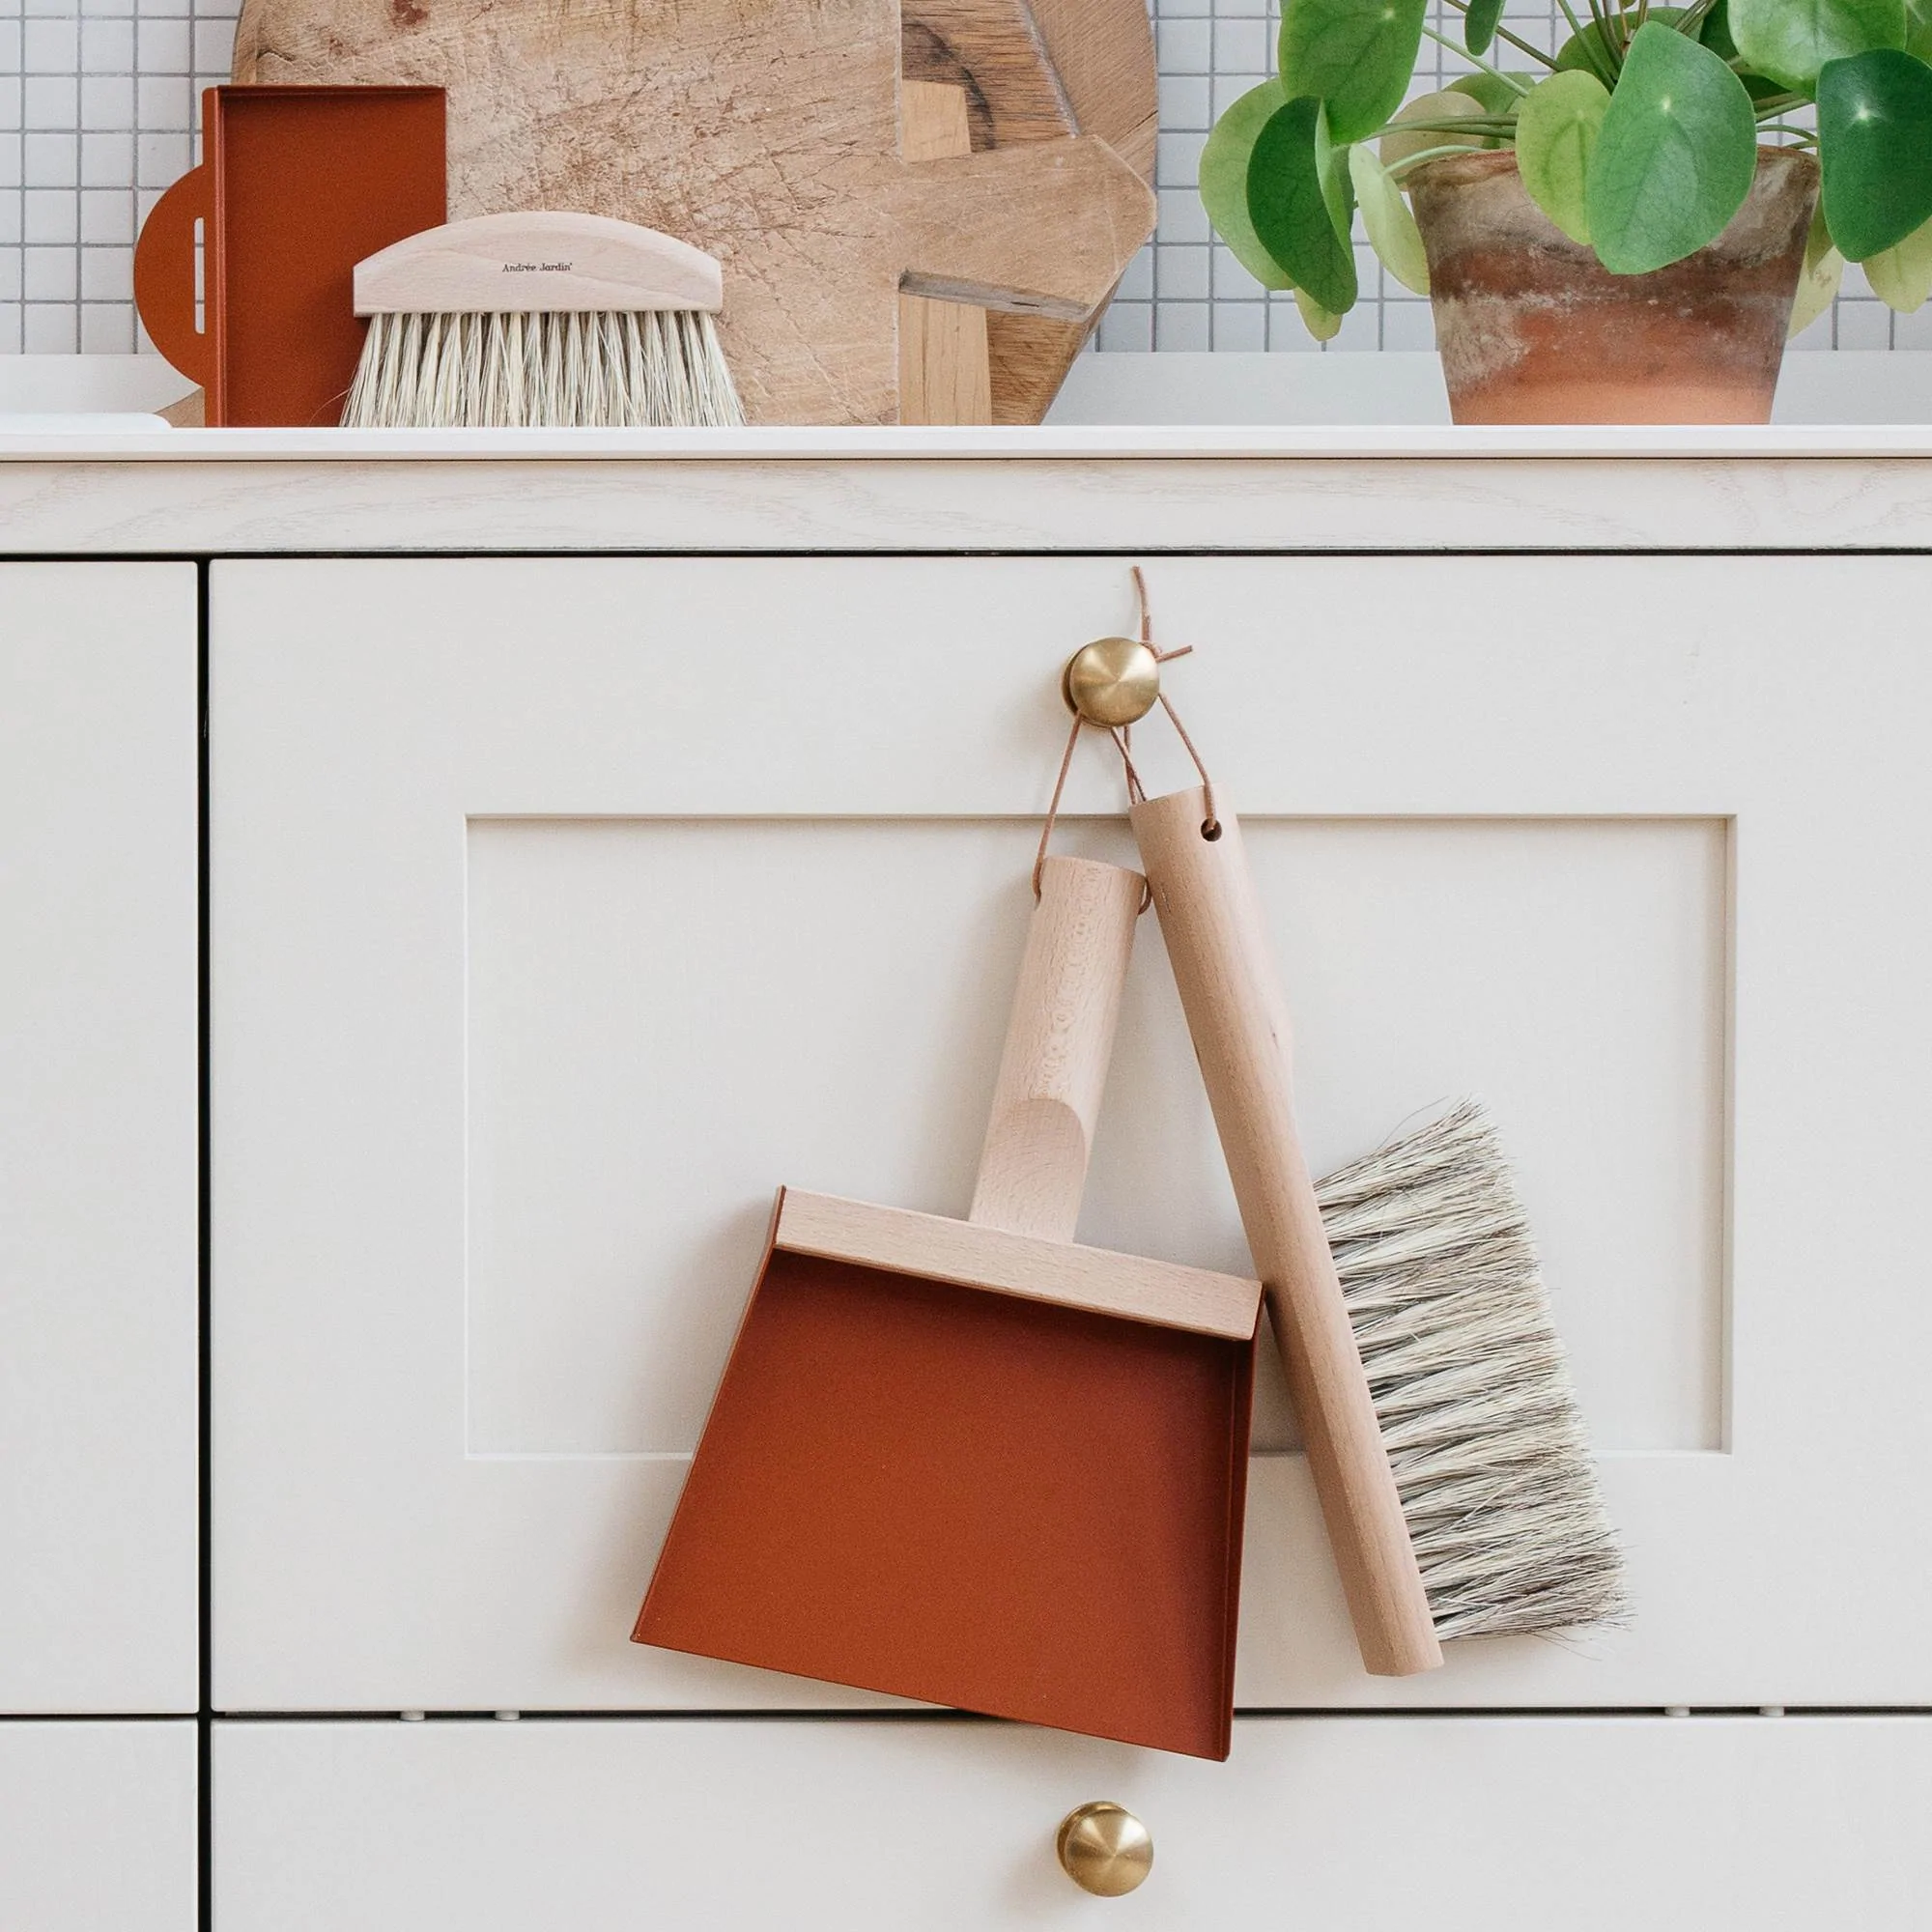 Andrée Jardin Mr. and Mrs. Clynk Dustpan & Natural Brush with Wall Hooks Set "Coffret" Gift Set Utilities Andrée Jardin Back in stock Brand_Andrée Jardin Home_Broom Sets Home_Household Cleaning New Arrivals coffret-pelle-balayette-clynk-nature-3242-tomette-2_03862329-9067-49a5-96c7-c21914851623_2000x2000AndreeJardinMr.andMrs.ClynkDustpan_NaturalBrushwithWallHooksSet_Coffret_GiftSetbrickr